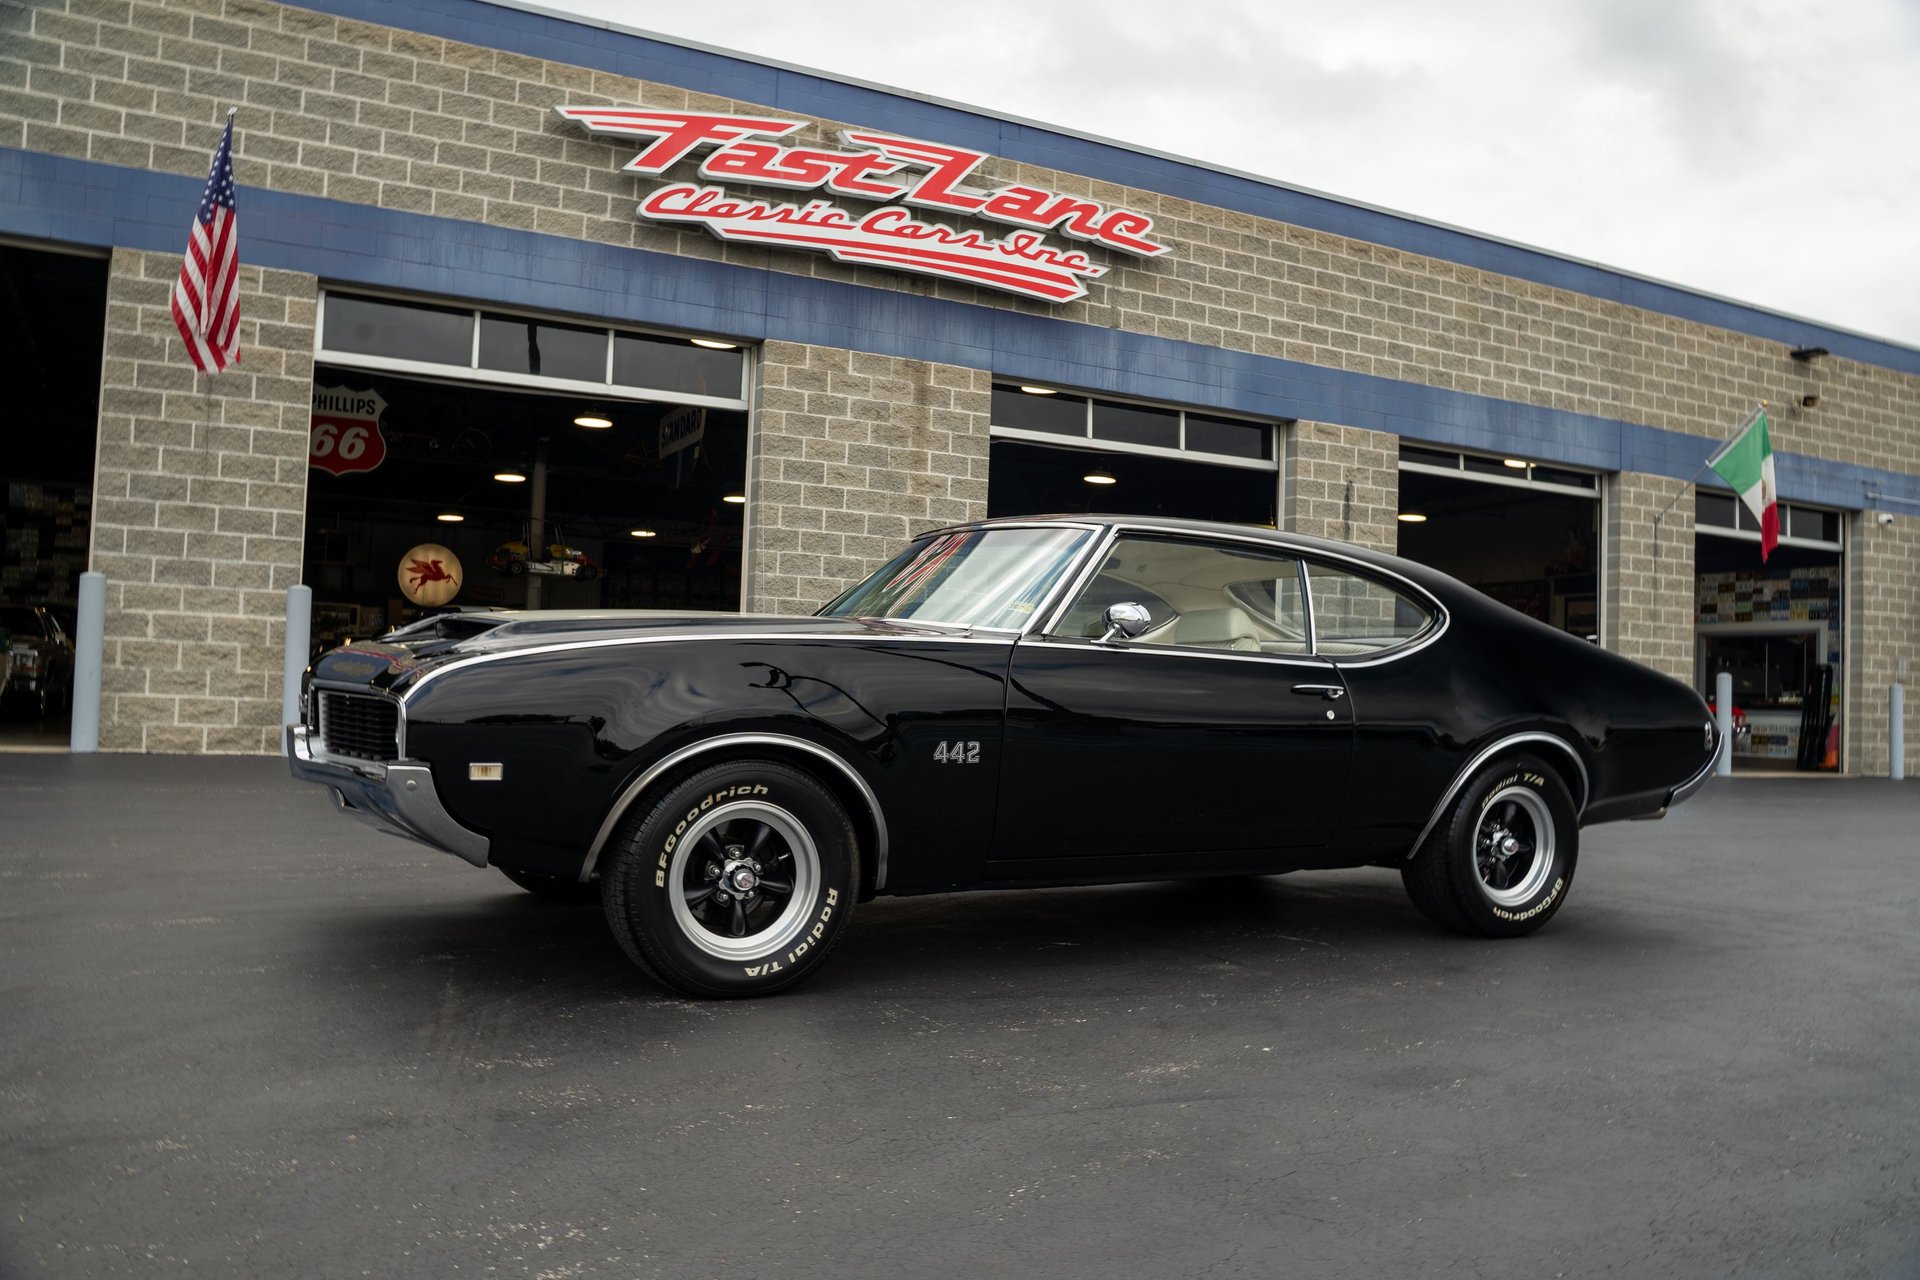 1969 oldsmobile 442 holiday coupe